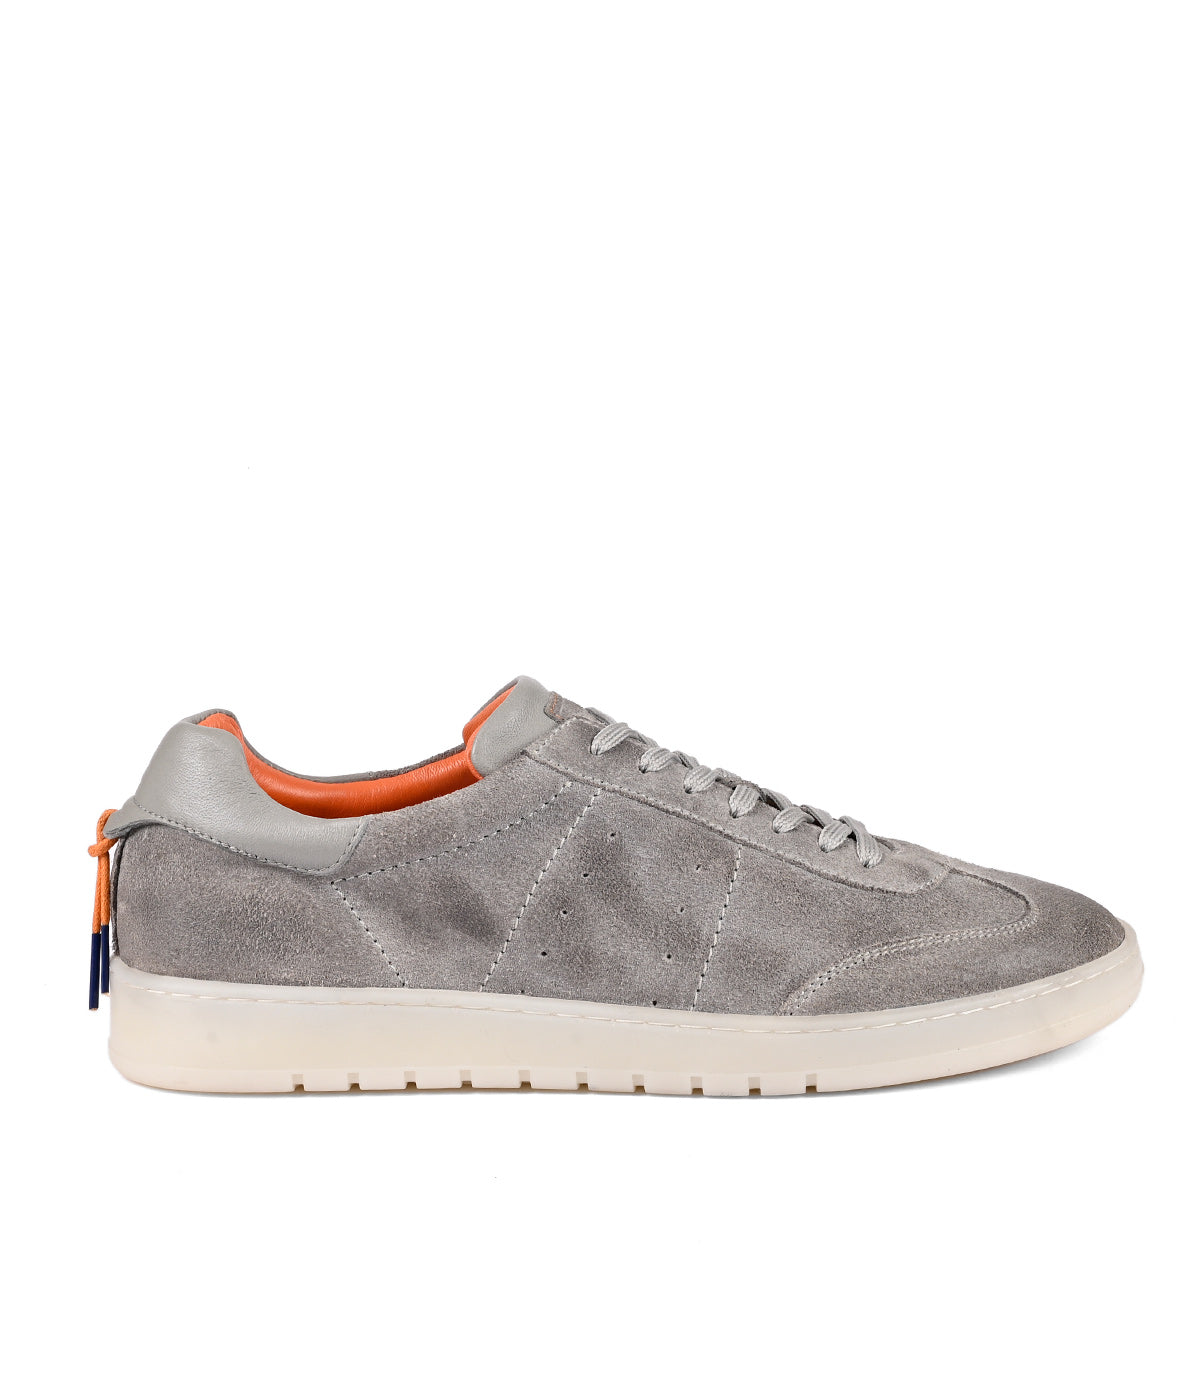 A side view of a gray soft suede leather Attitude sneaker by Roan with white soles and orange lining against a white background.